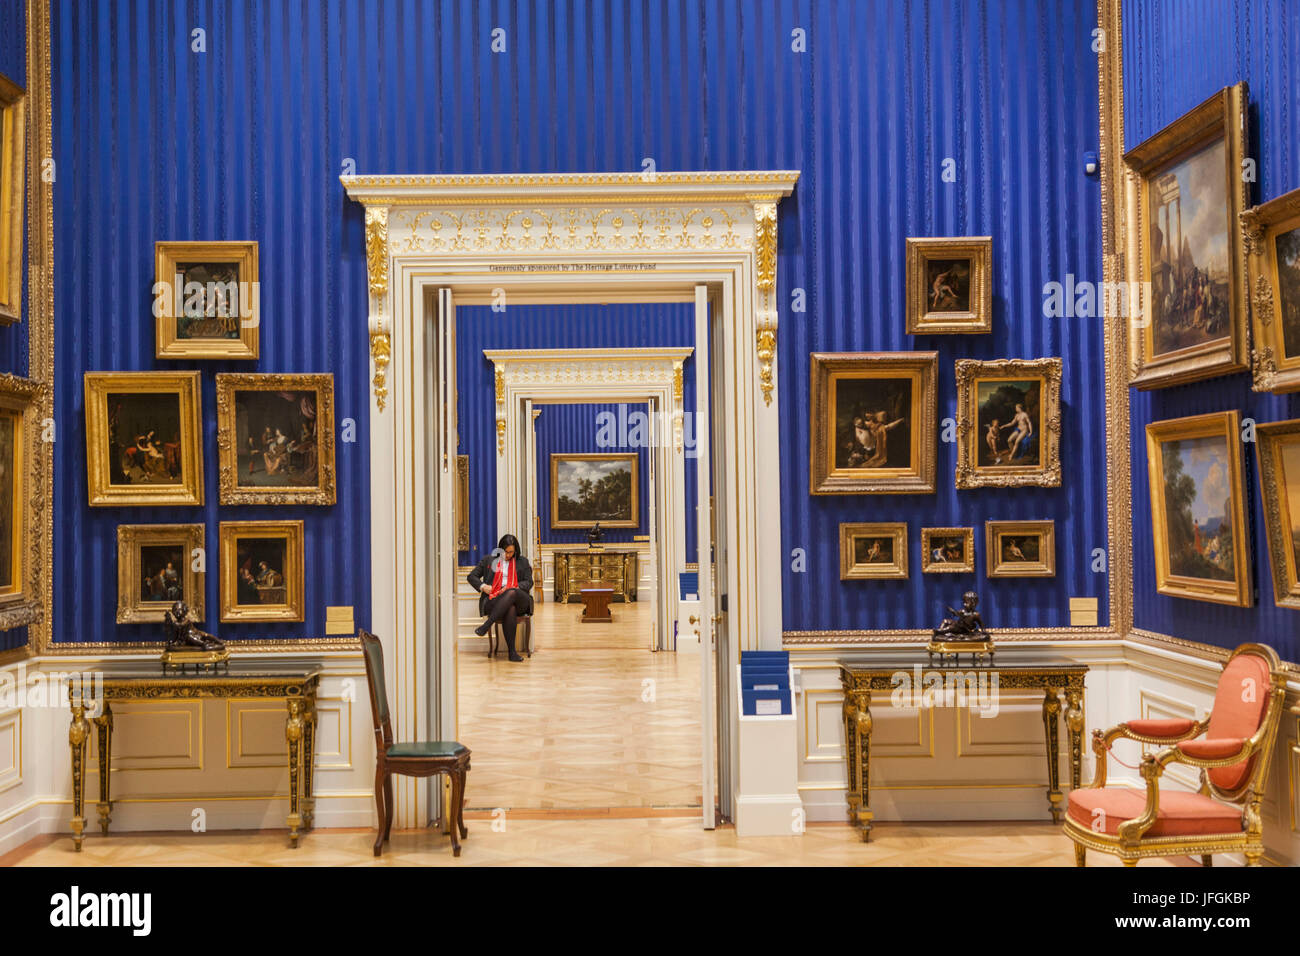 England, London, The Wallace Collection Museum, Interior View Stock Photo